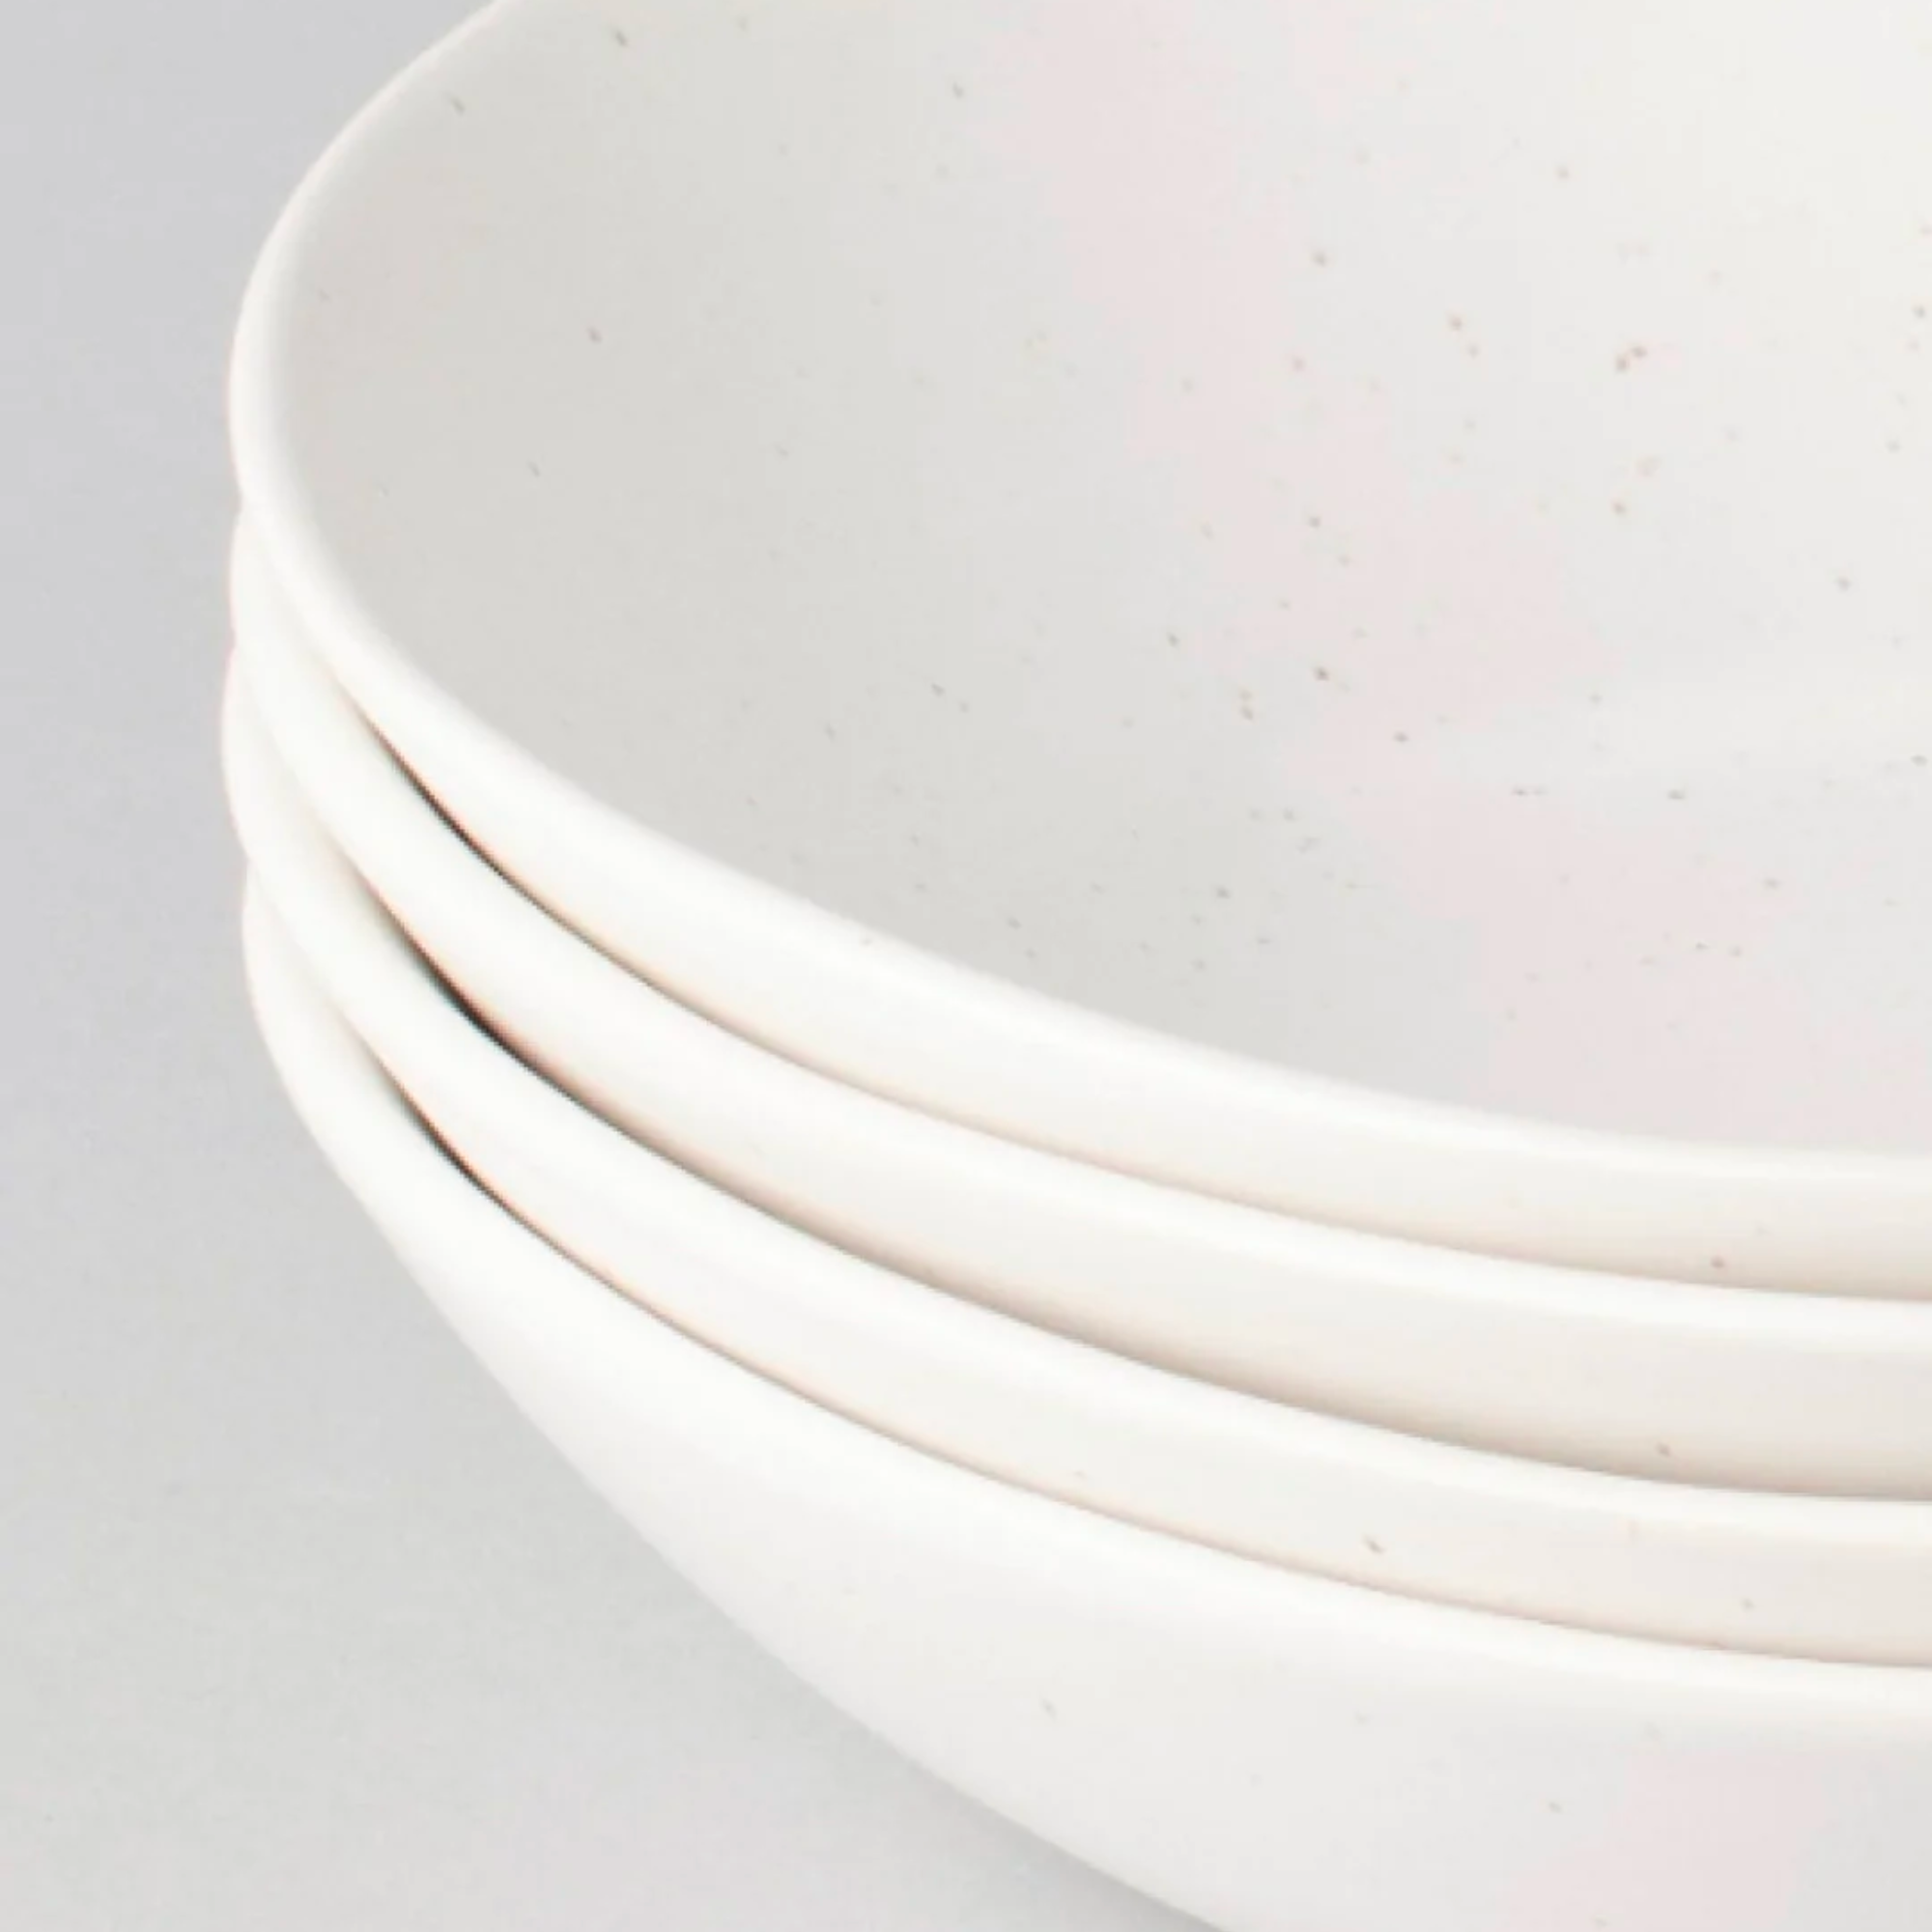 Fable Pasta Bowls - Speckled White